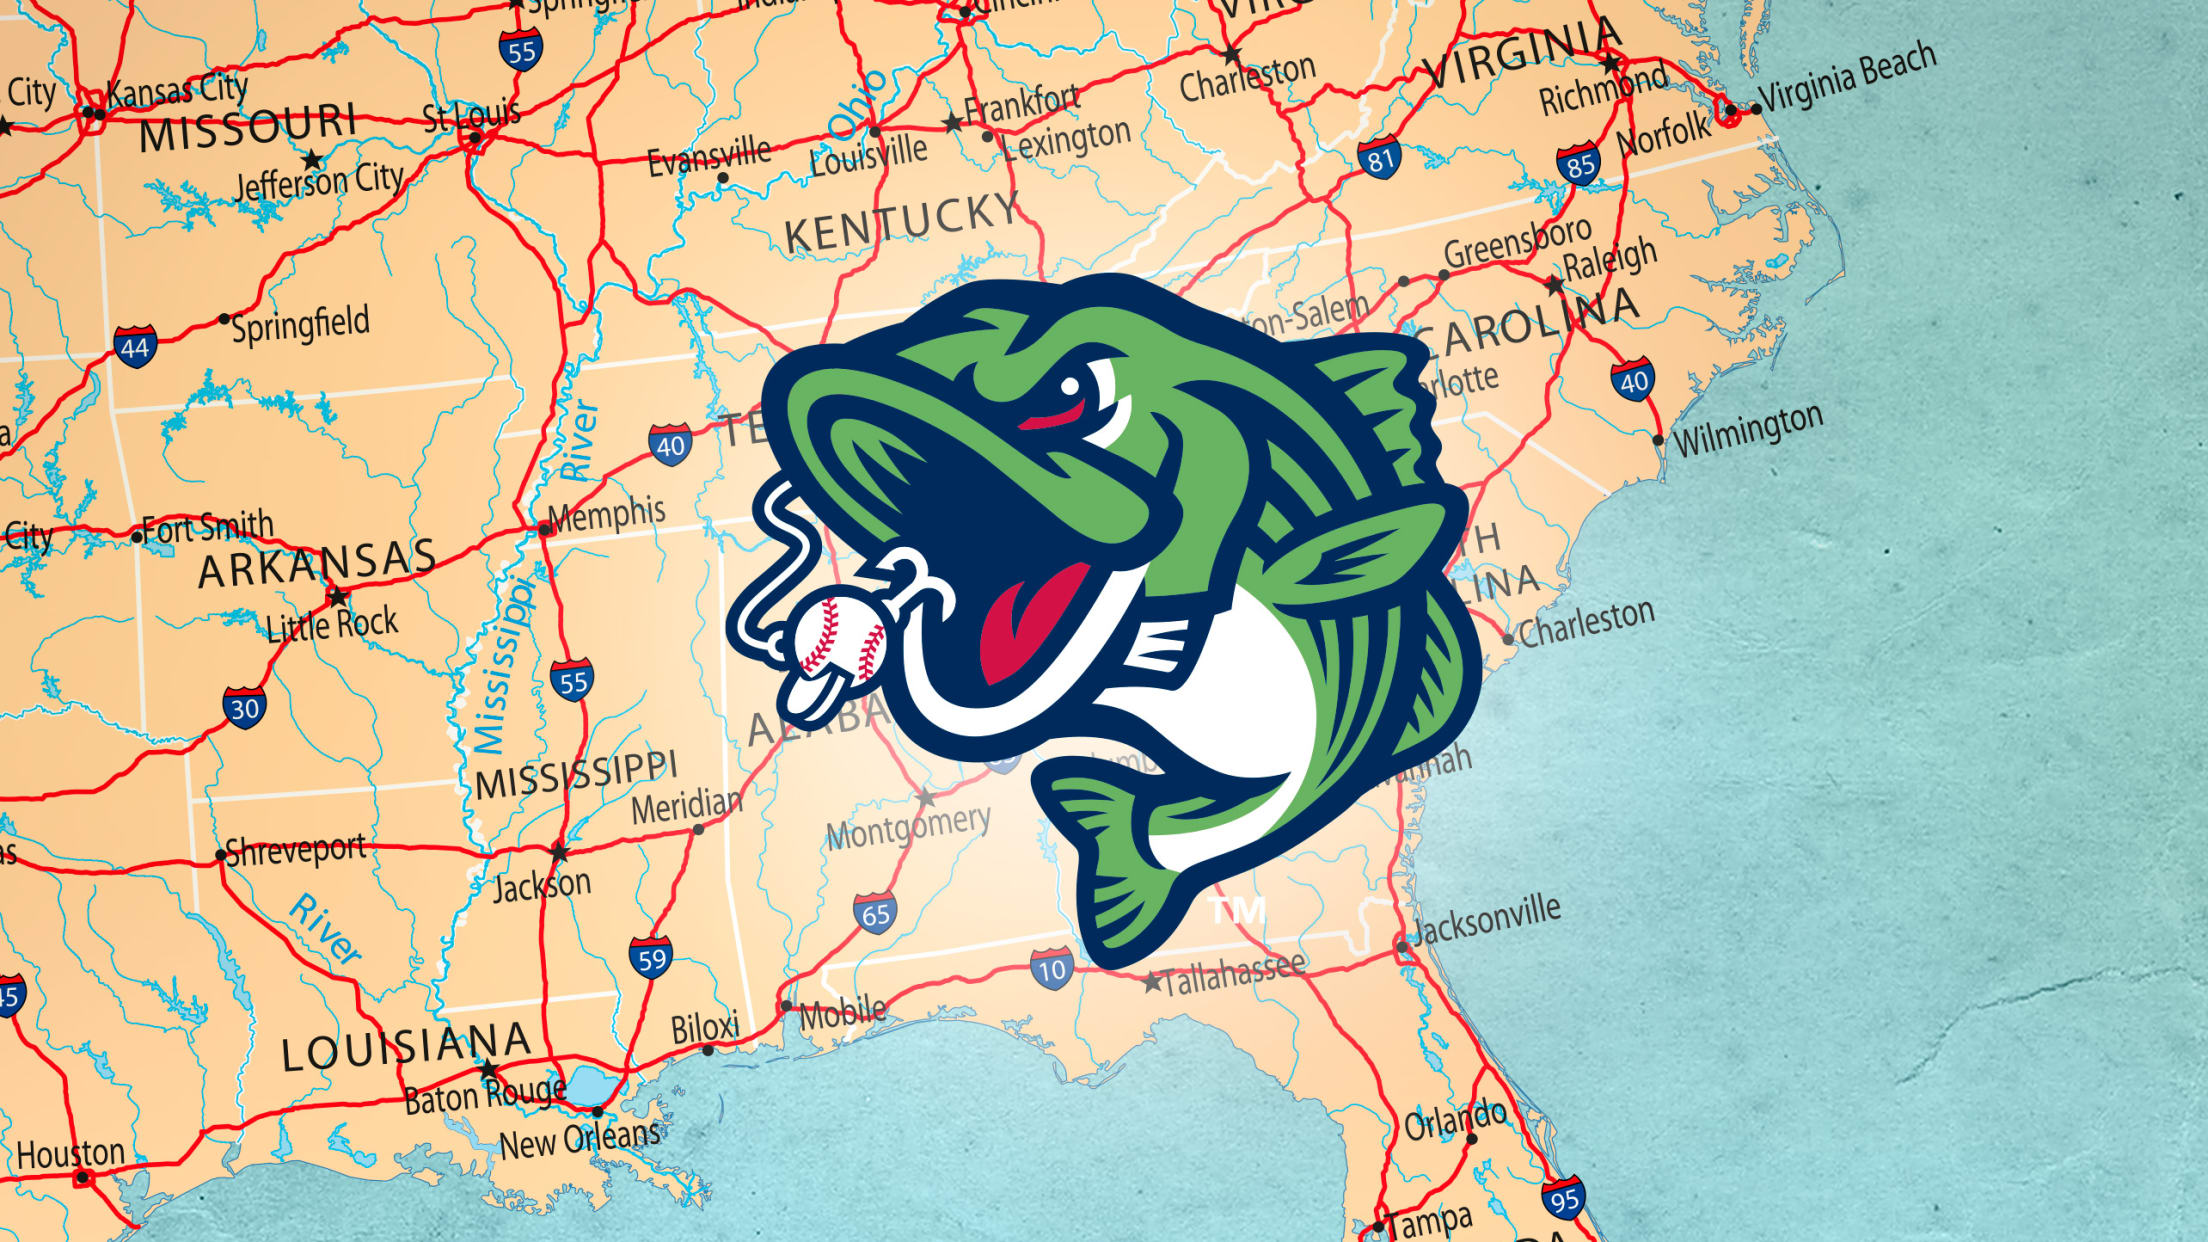 Explore Coolray Field of the Gwinnett Stripers